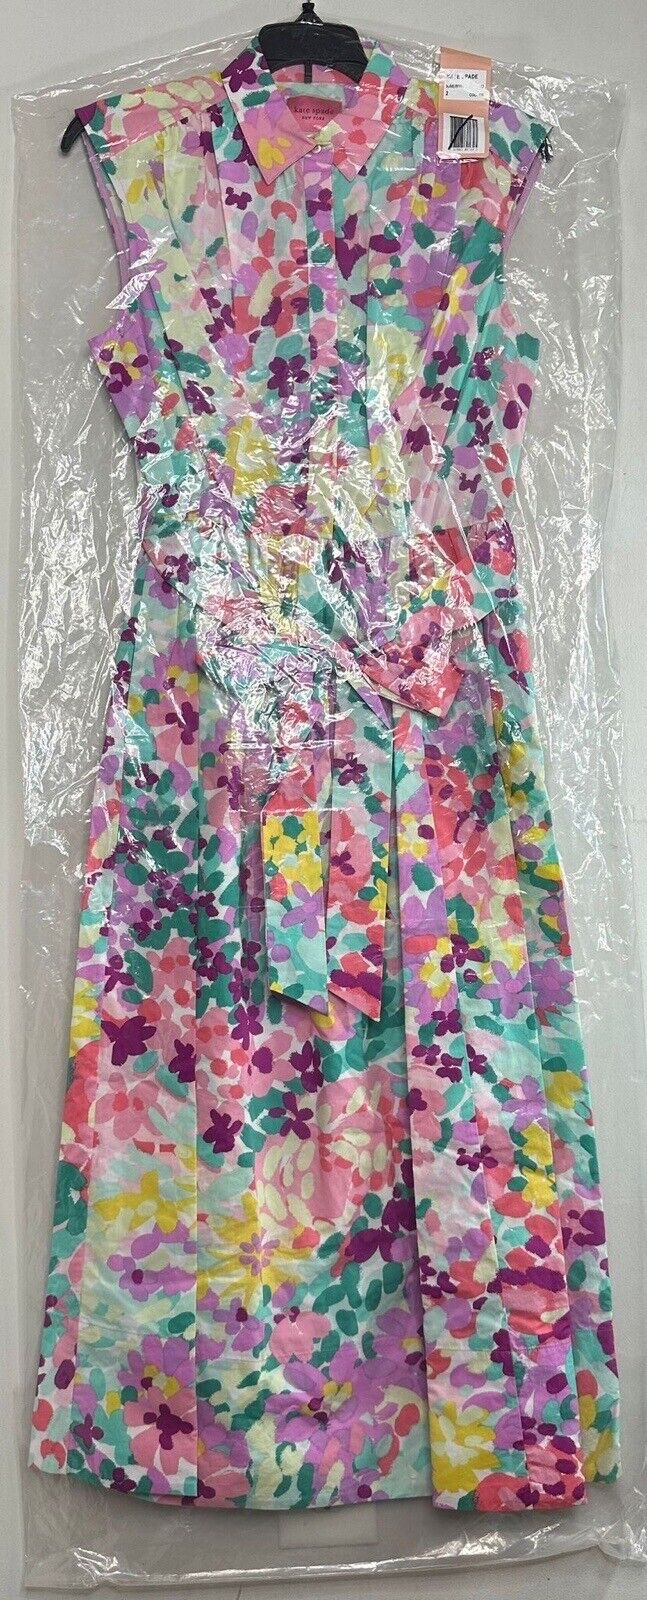 NWT kate spade Womens Shirtdress Multi 8 Painted Petals Floral Cotton Pastel